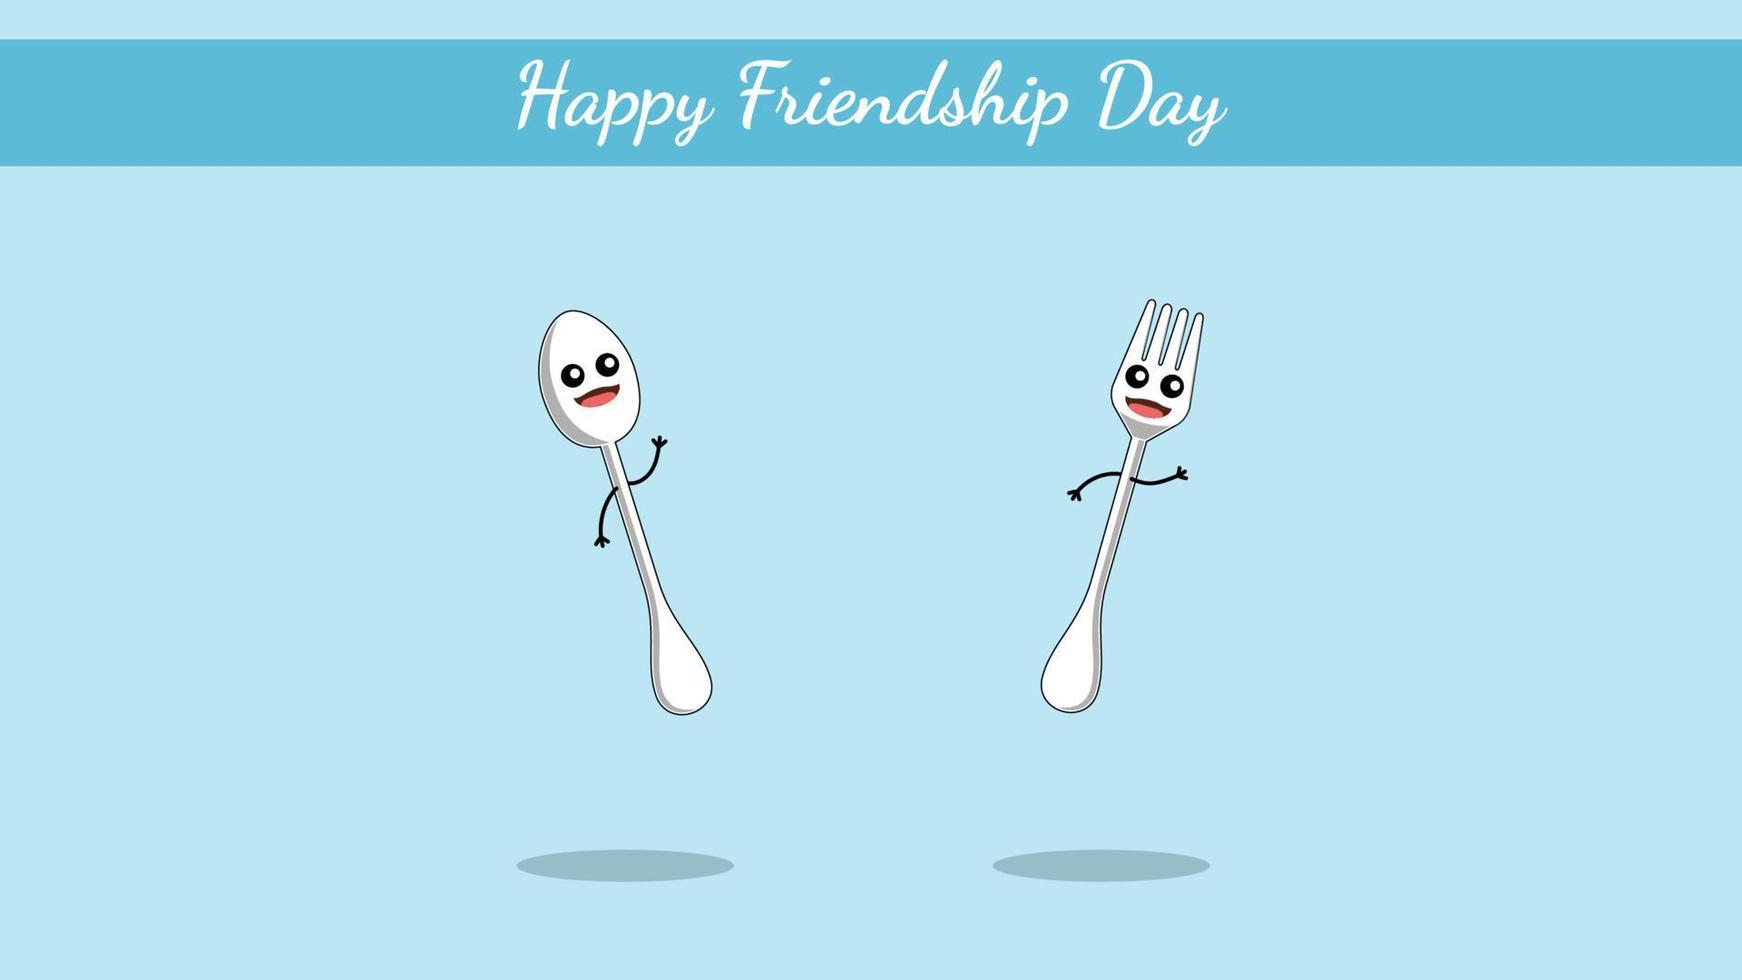 Happy Friendship Day India, cute spoon and fork character vector on white background.